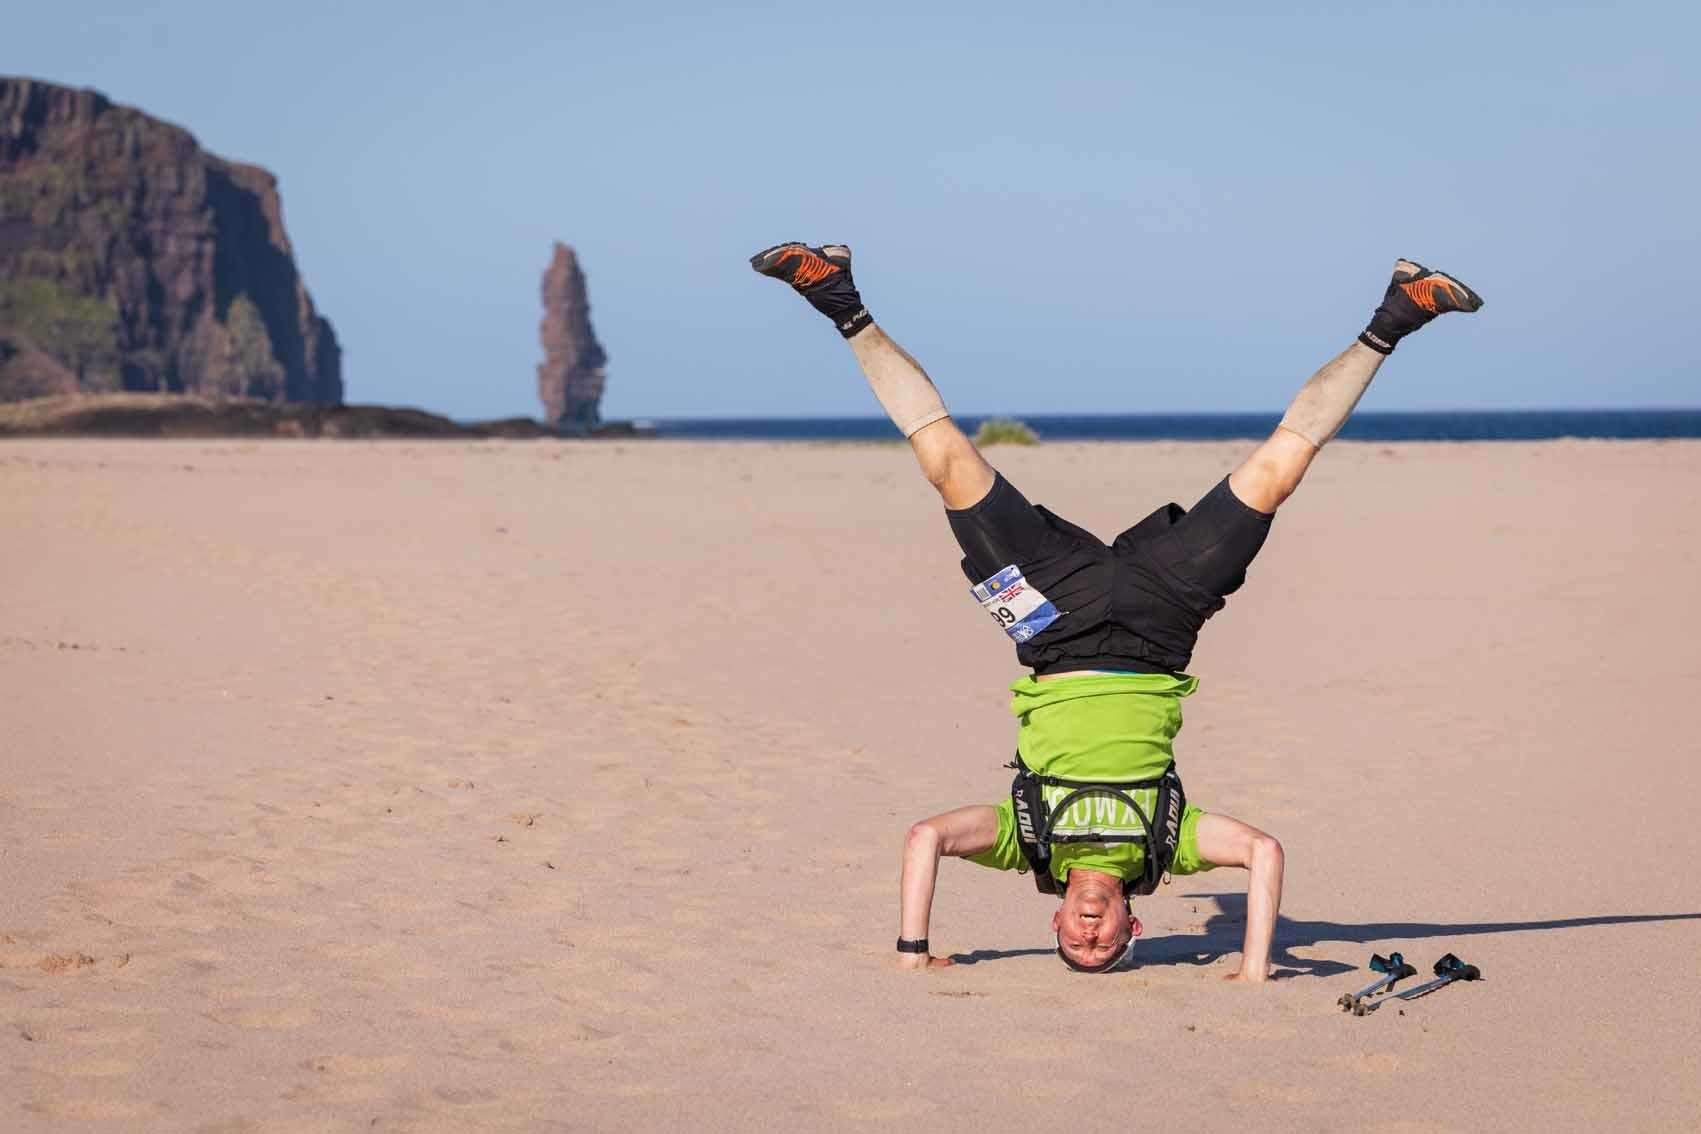 Participant Iain Loader enjoys the space at Sandwood Bay last year. Picture: Cape Wrath Ultra/ No Limits Photography